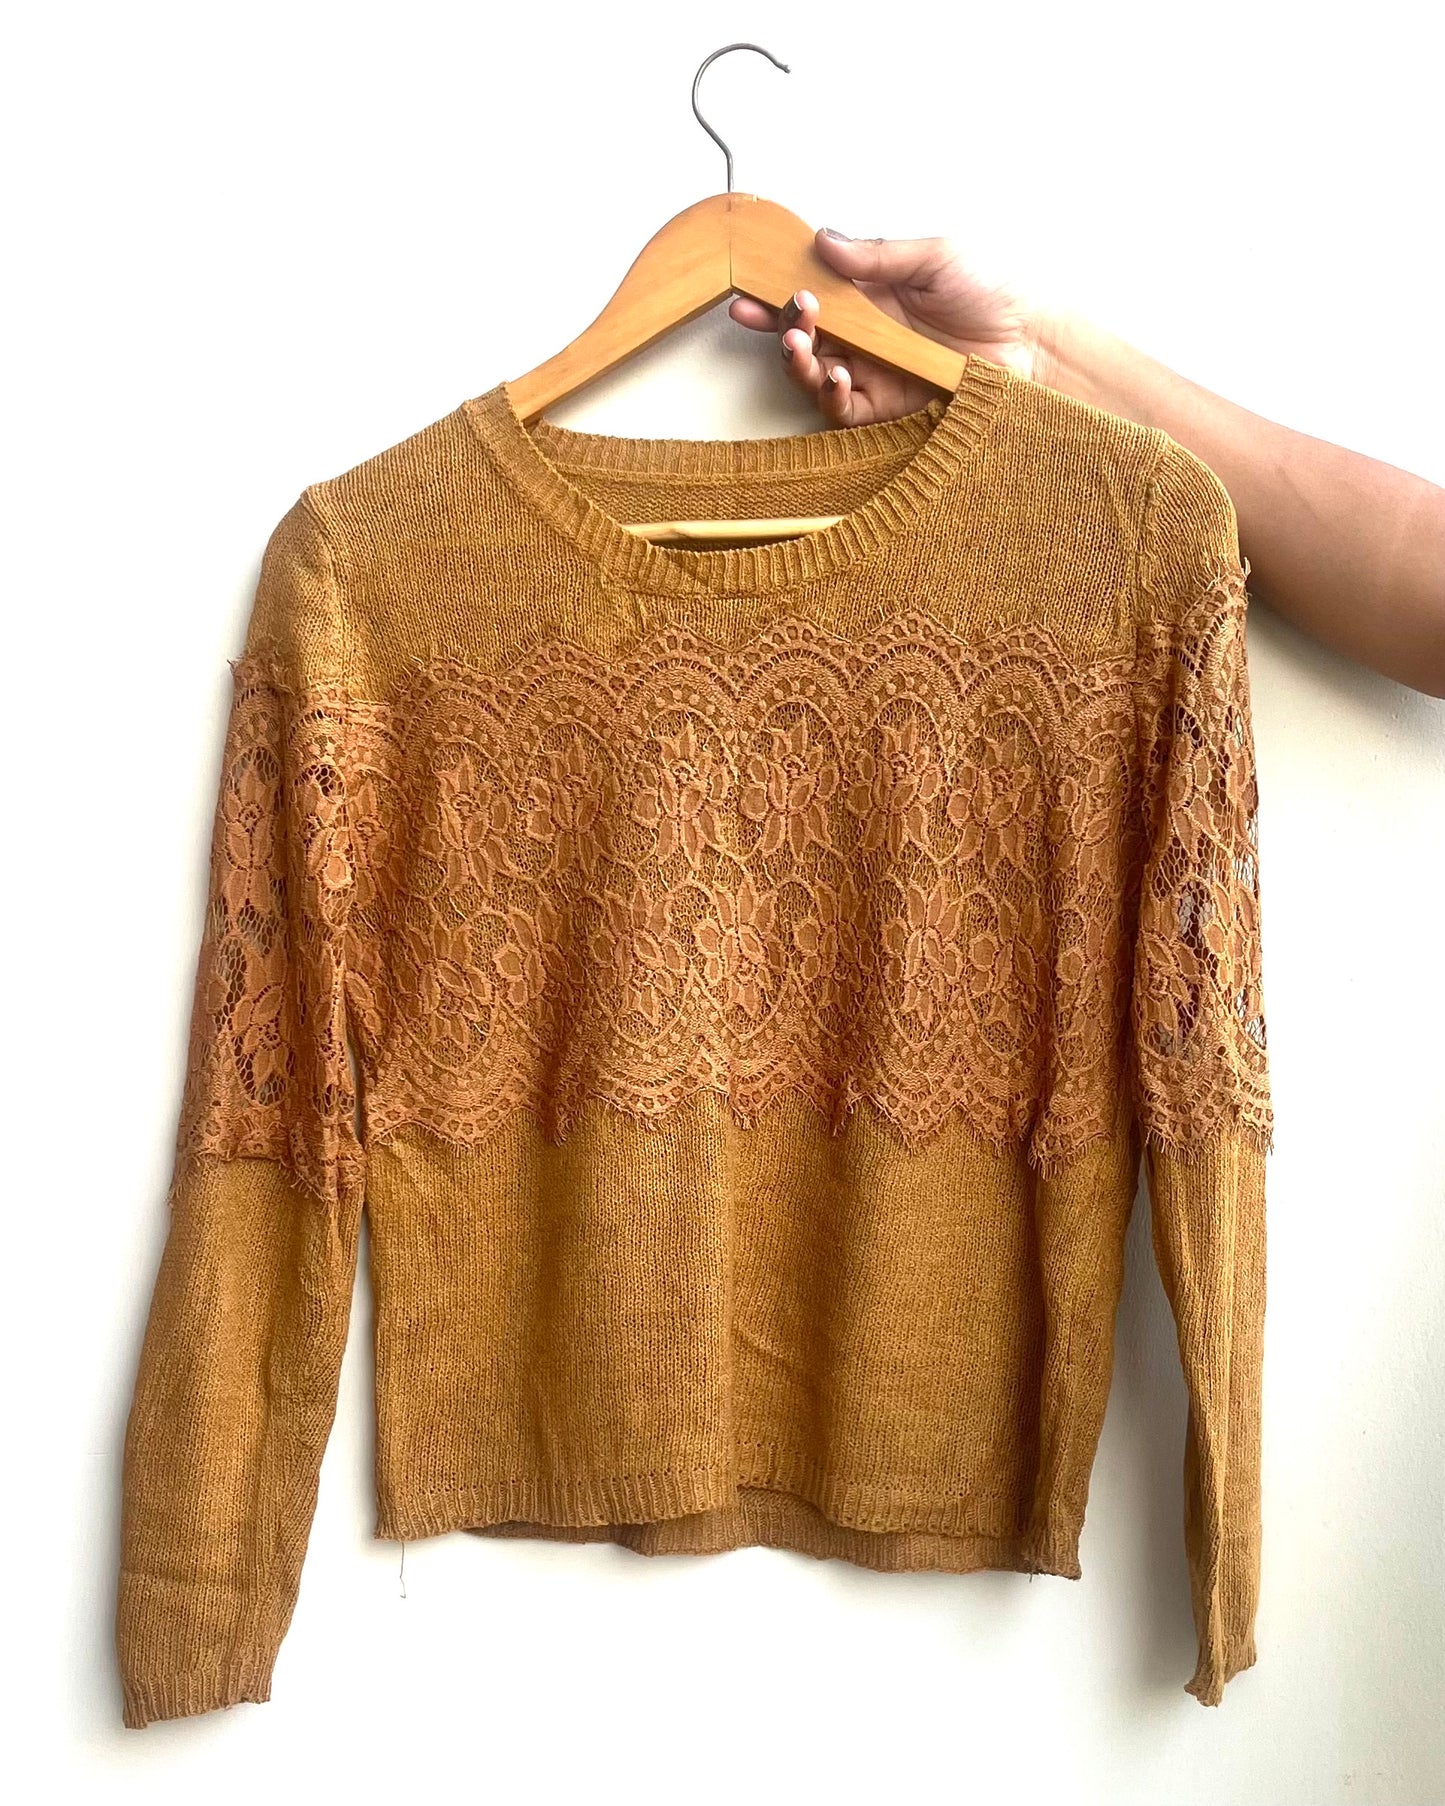 Mustard Lace Embellished Knitted Top